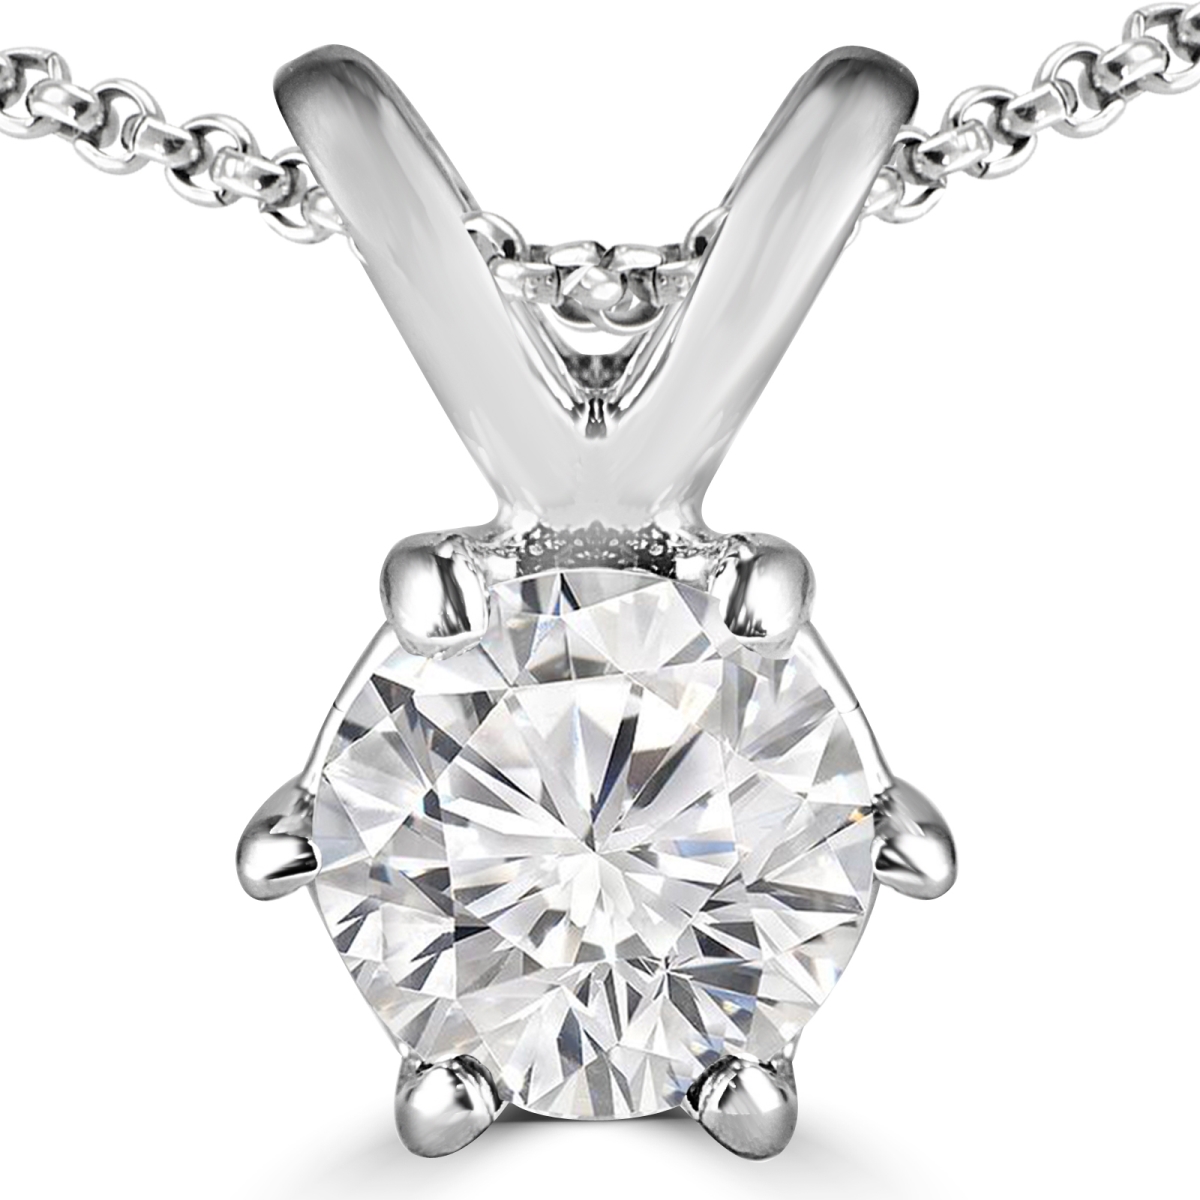 Md170215 0.75 Ct Round Diamond Solitaire Pendant Necklace In 14k